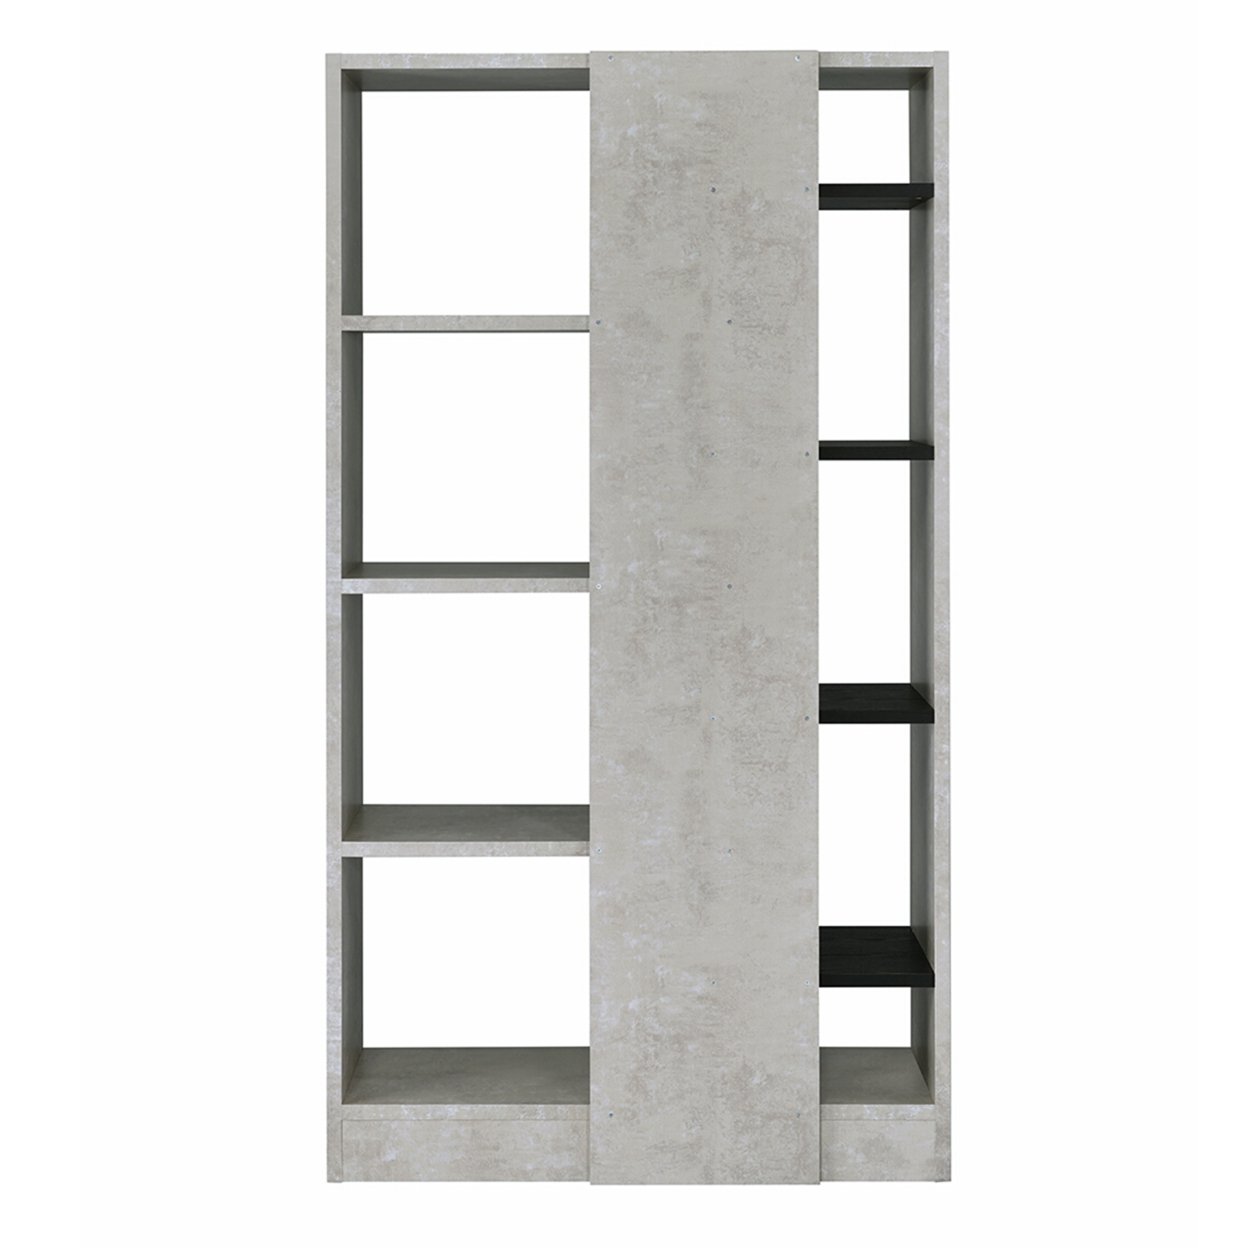 Faux Concrete And Wooden Bookshelf With Open Shelves, Gray And Black- Saltoro Sherpi